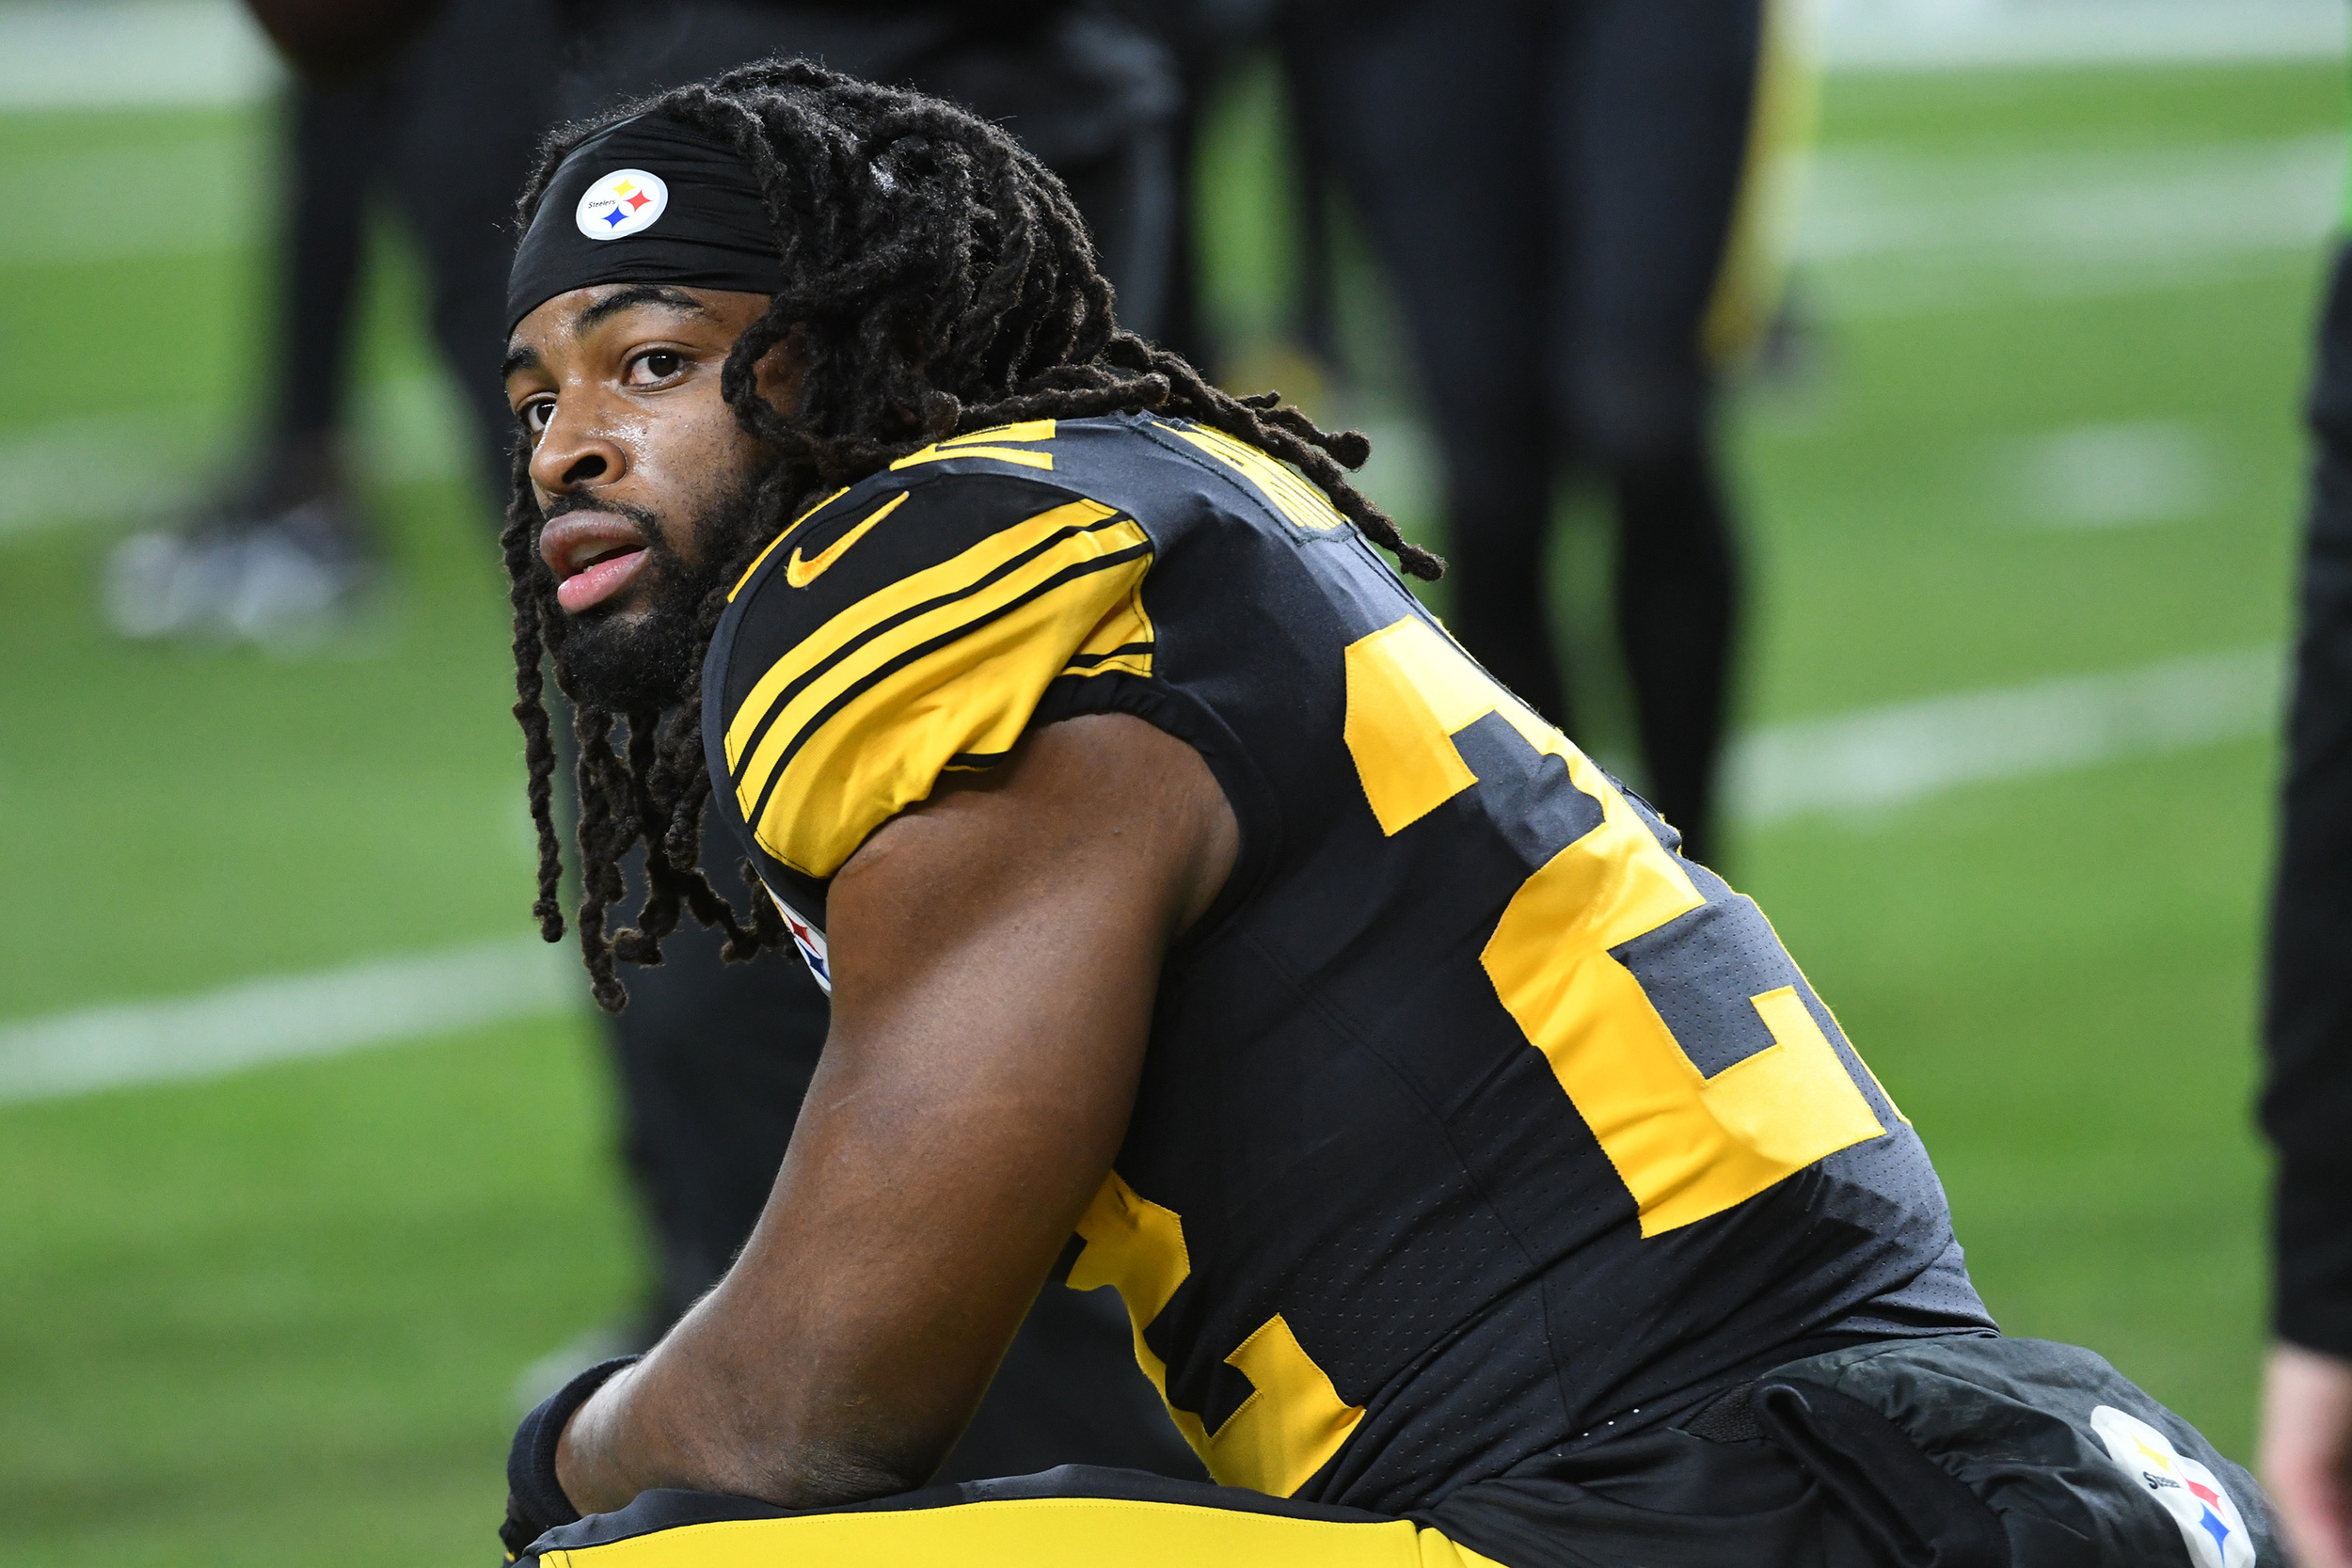 najee harris' days in pittsburgh could be numbered